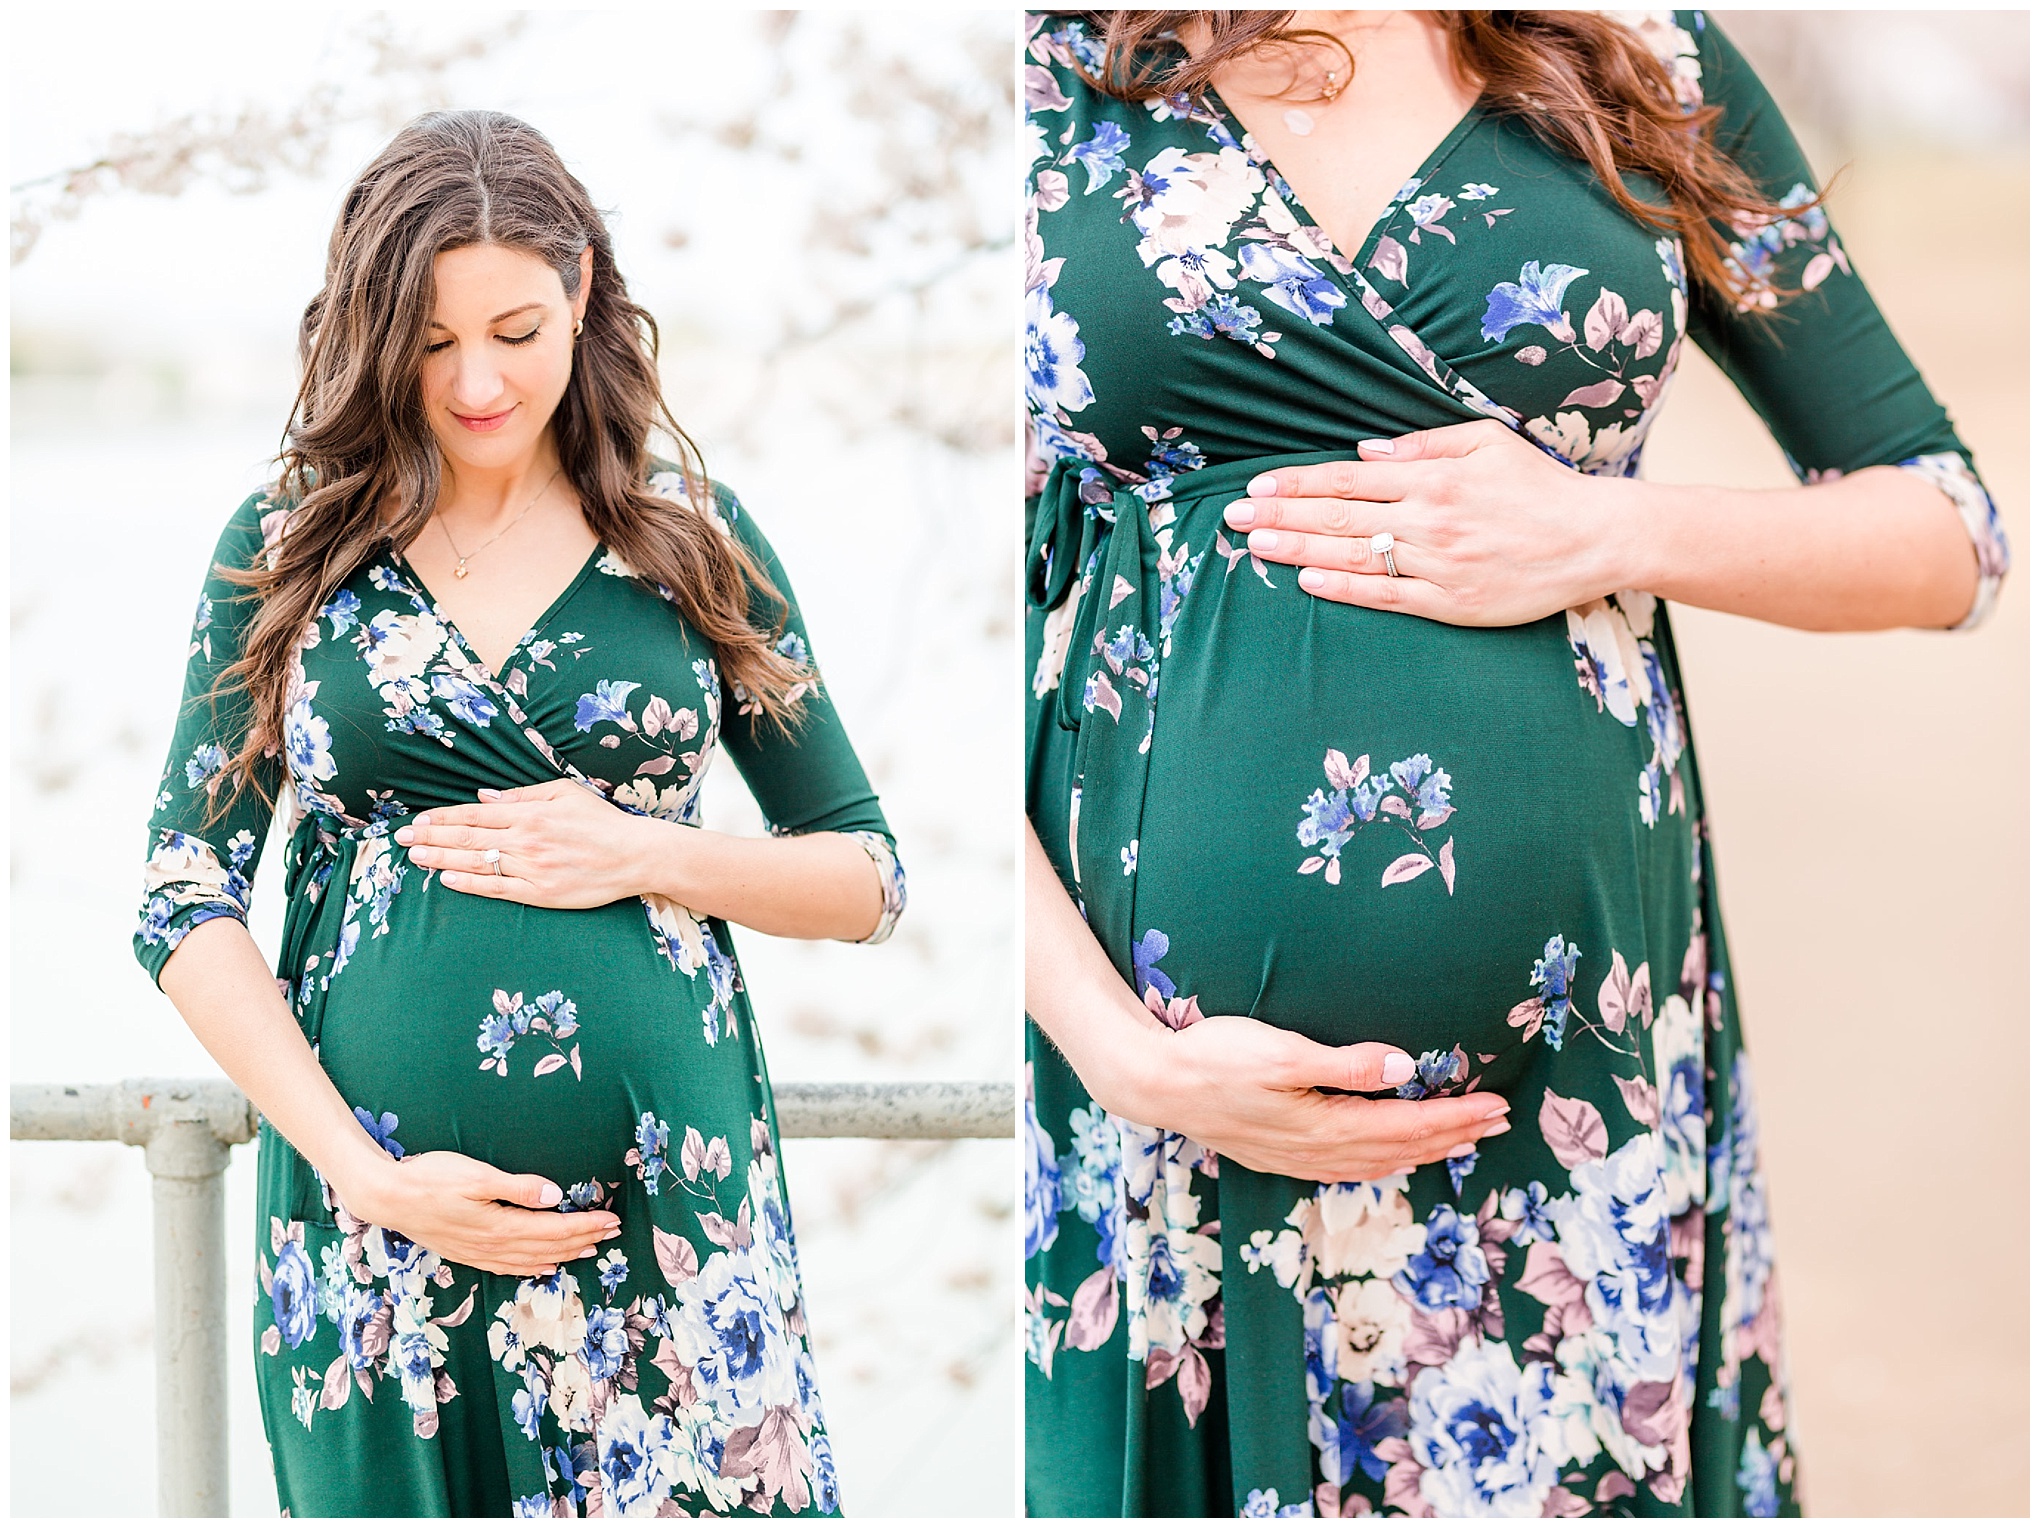 D.C. cherry blossoms maternity session, maternity portraits, maternity photos, D.C. cherry blossoms, cherry blossoms maternity photo, floral print top, brunette expectant mom, expecting mother, brunette woman, pregnant woman, third trimester, baby bump, floral frame